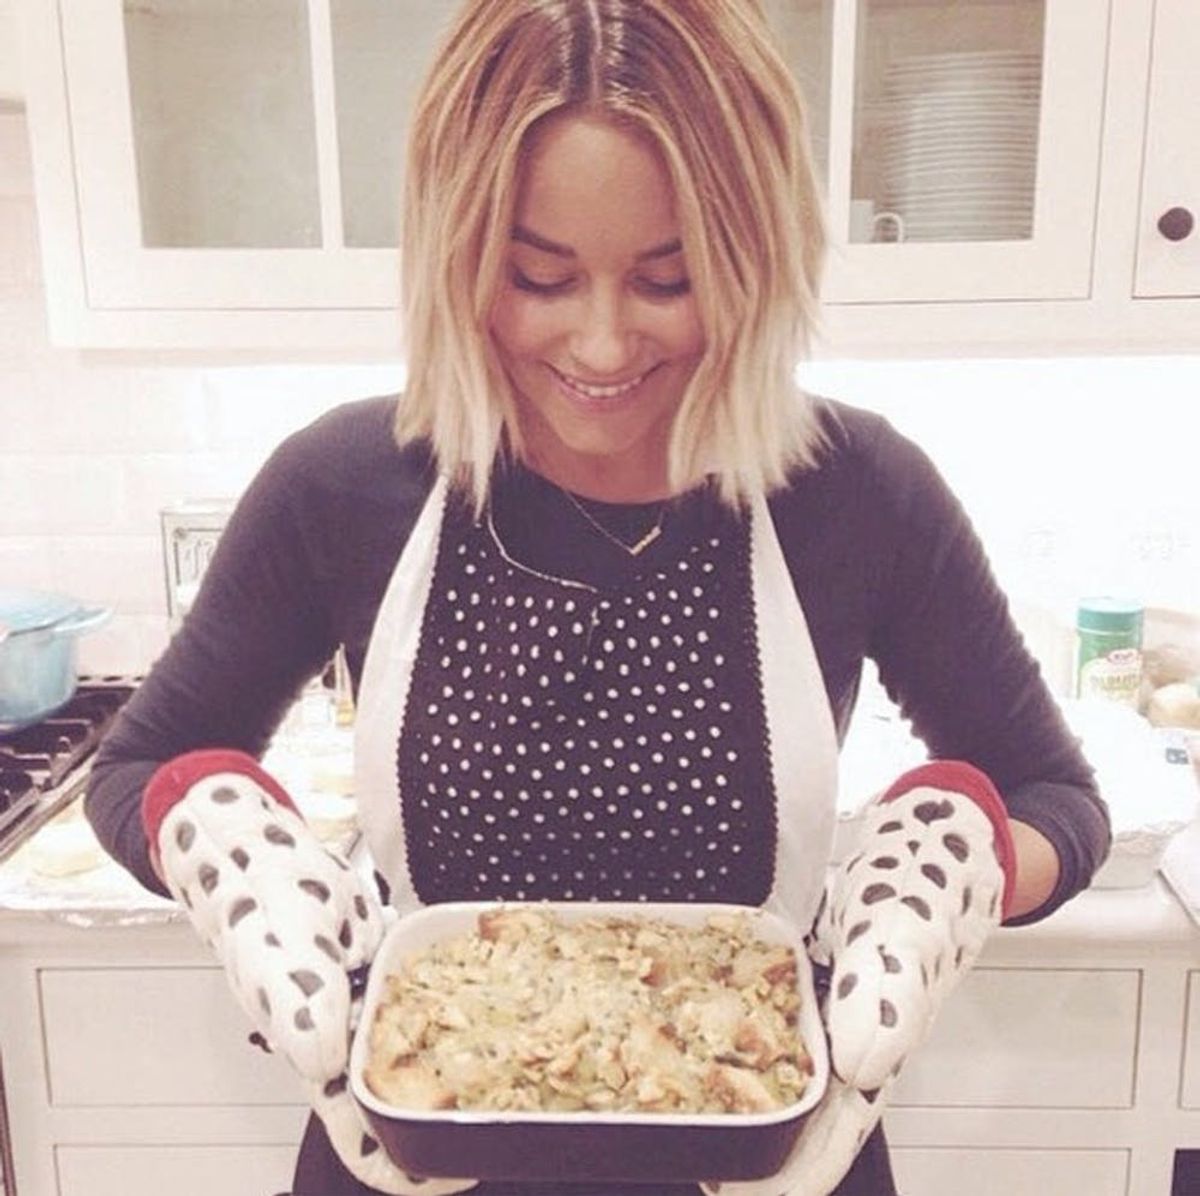 These 12 Celebs’ Instagrams Will Inspire You to Cook More